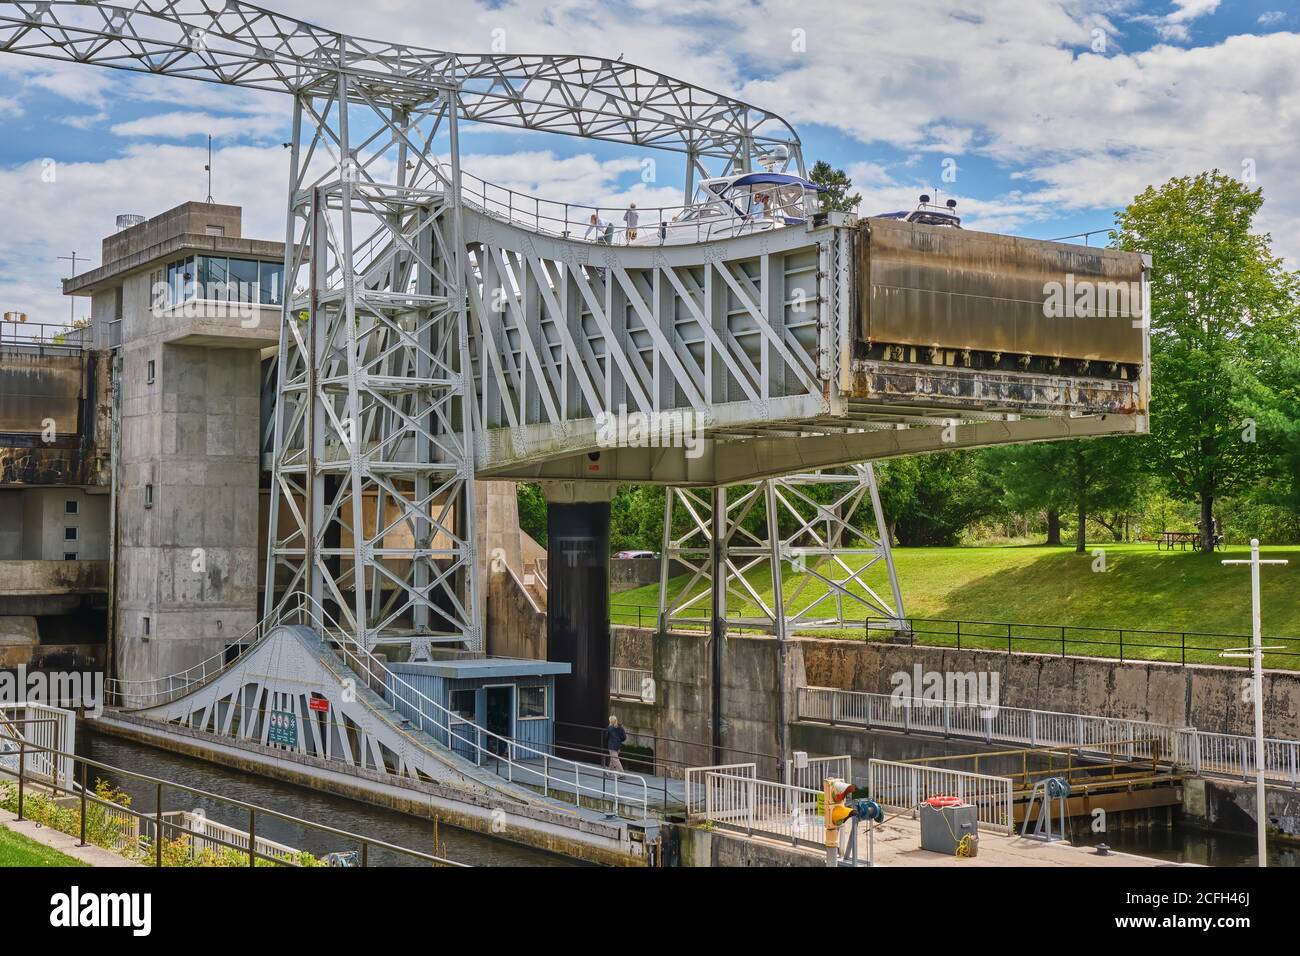 The Kirkfield Lift lock, one of a series of locks on the Trent-Severn Waterway is the second highest hydraulic boat lift in the world at 15 metres or Stock Photo